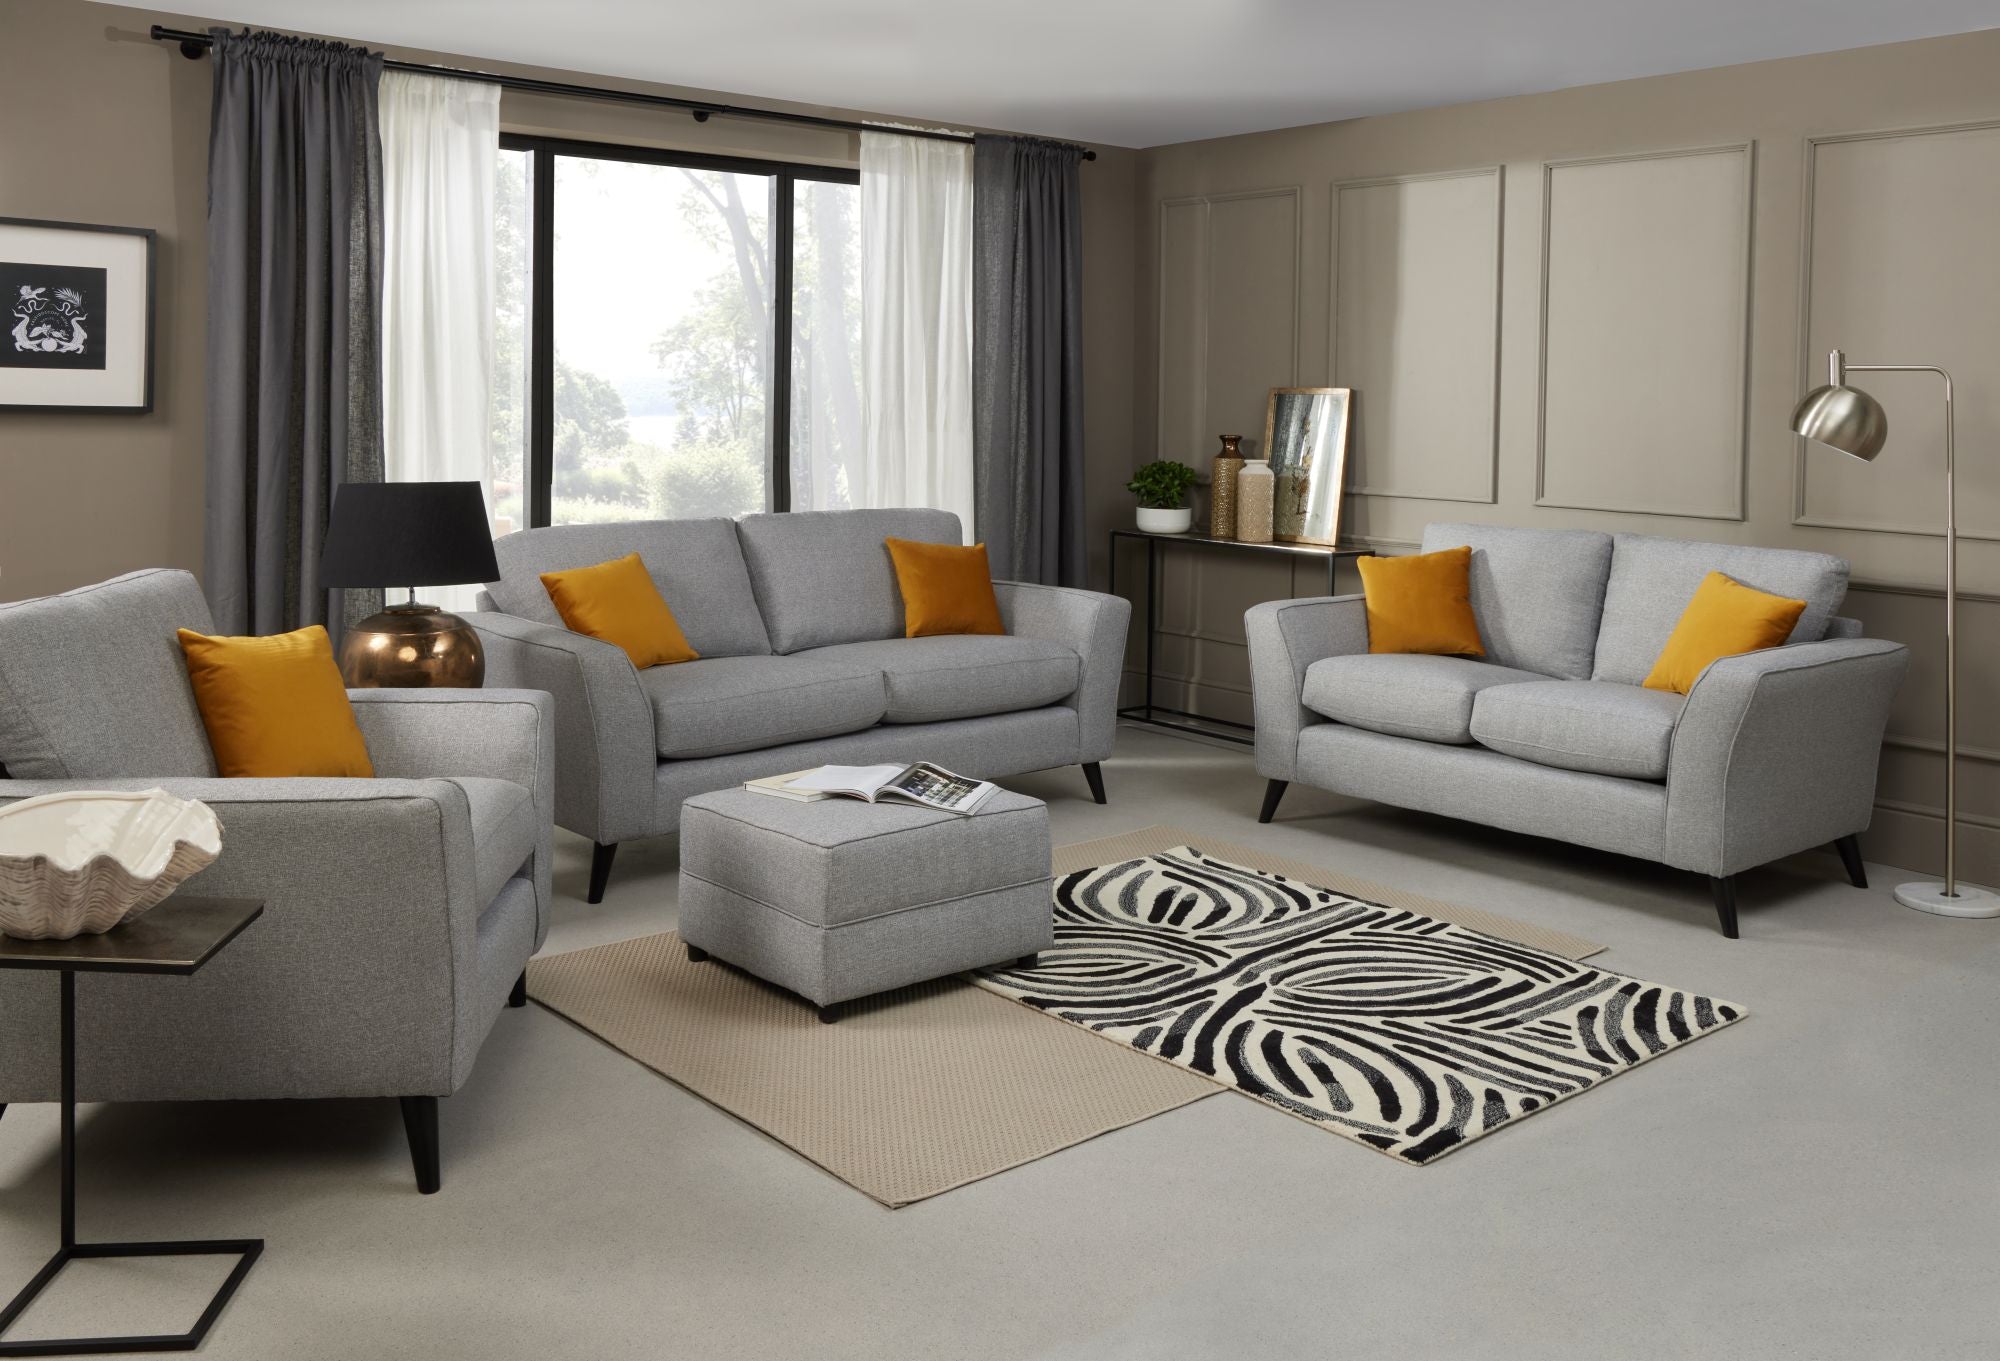 Libby 3 seater, 2 seater, armchair and footstool in silver shown in a room setting